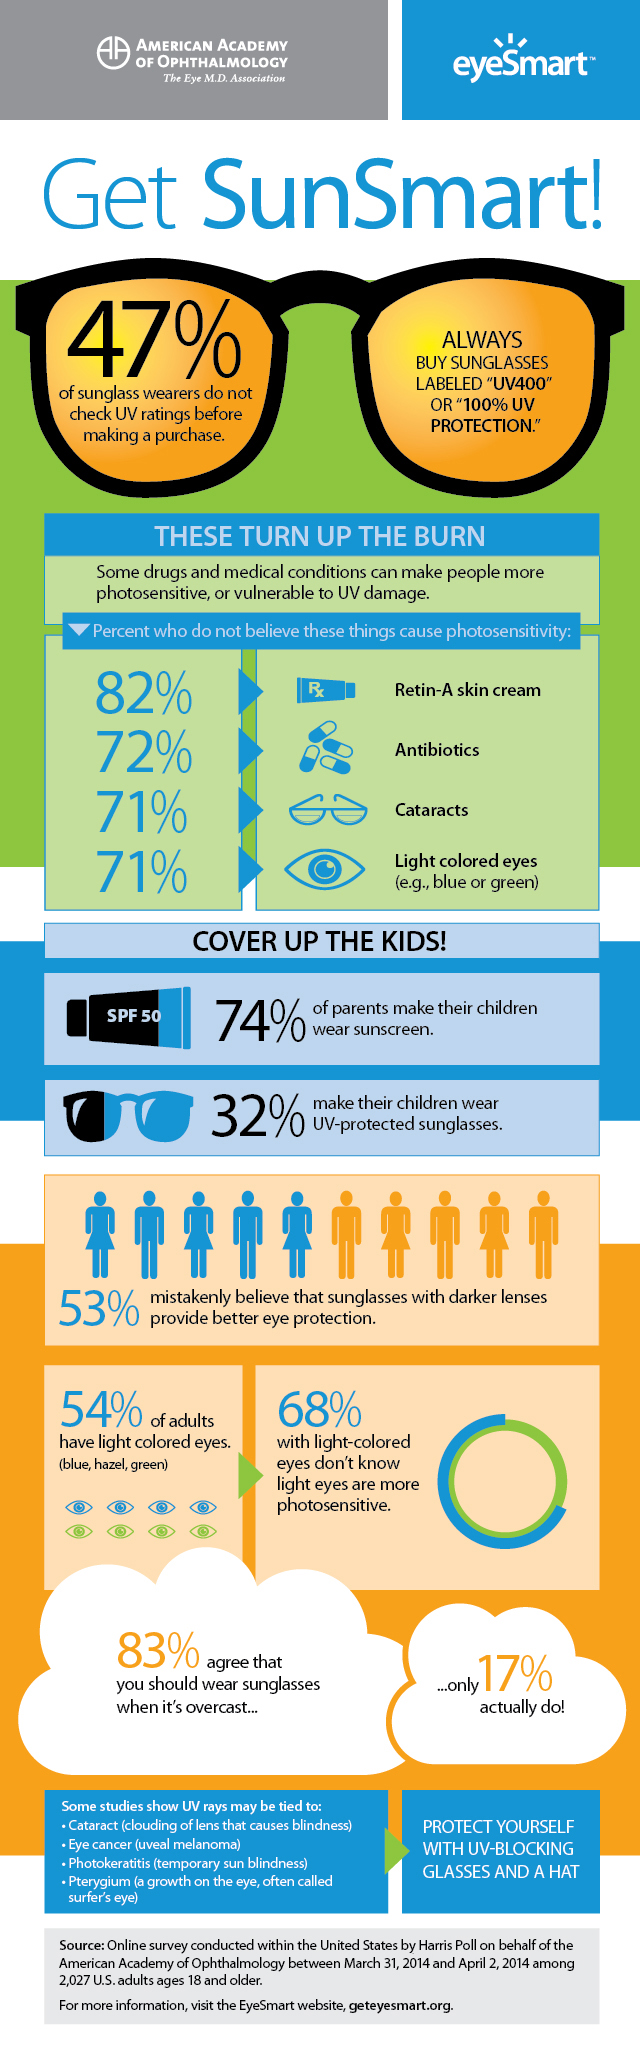 What UV is safe for eyes?